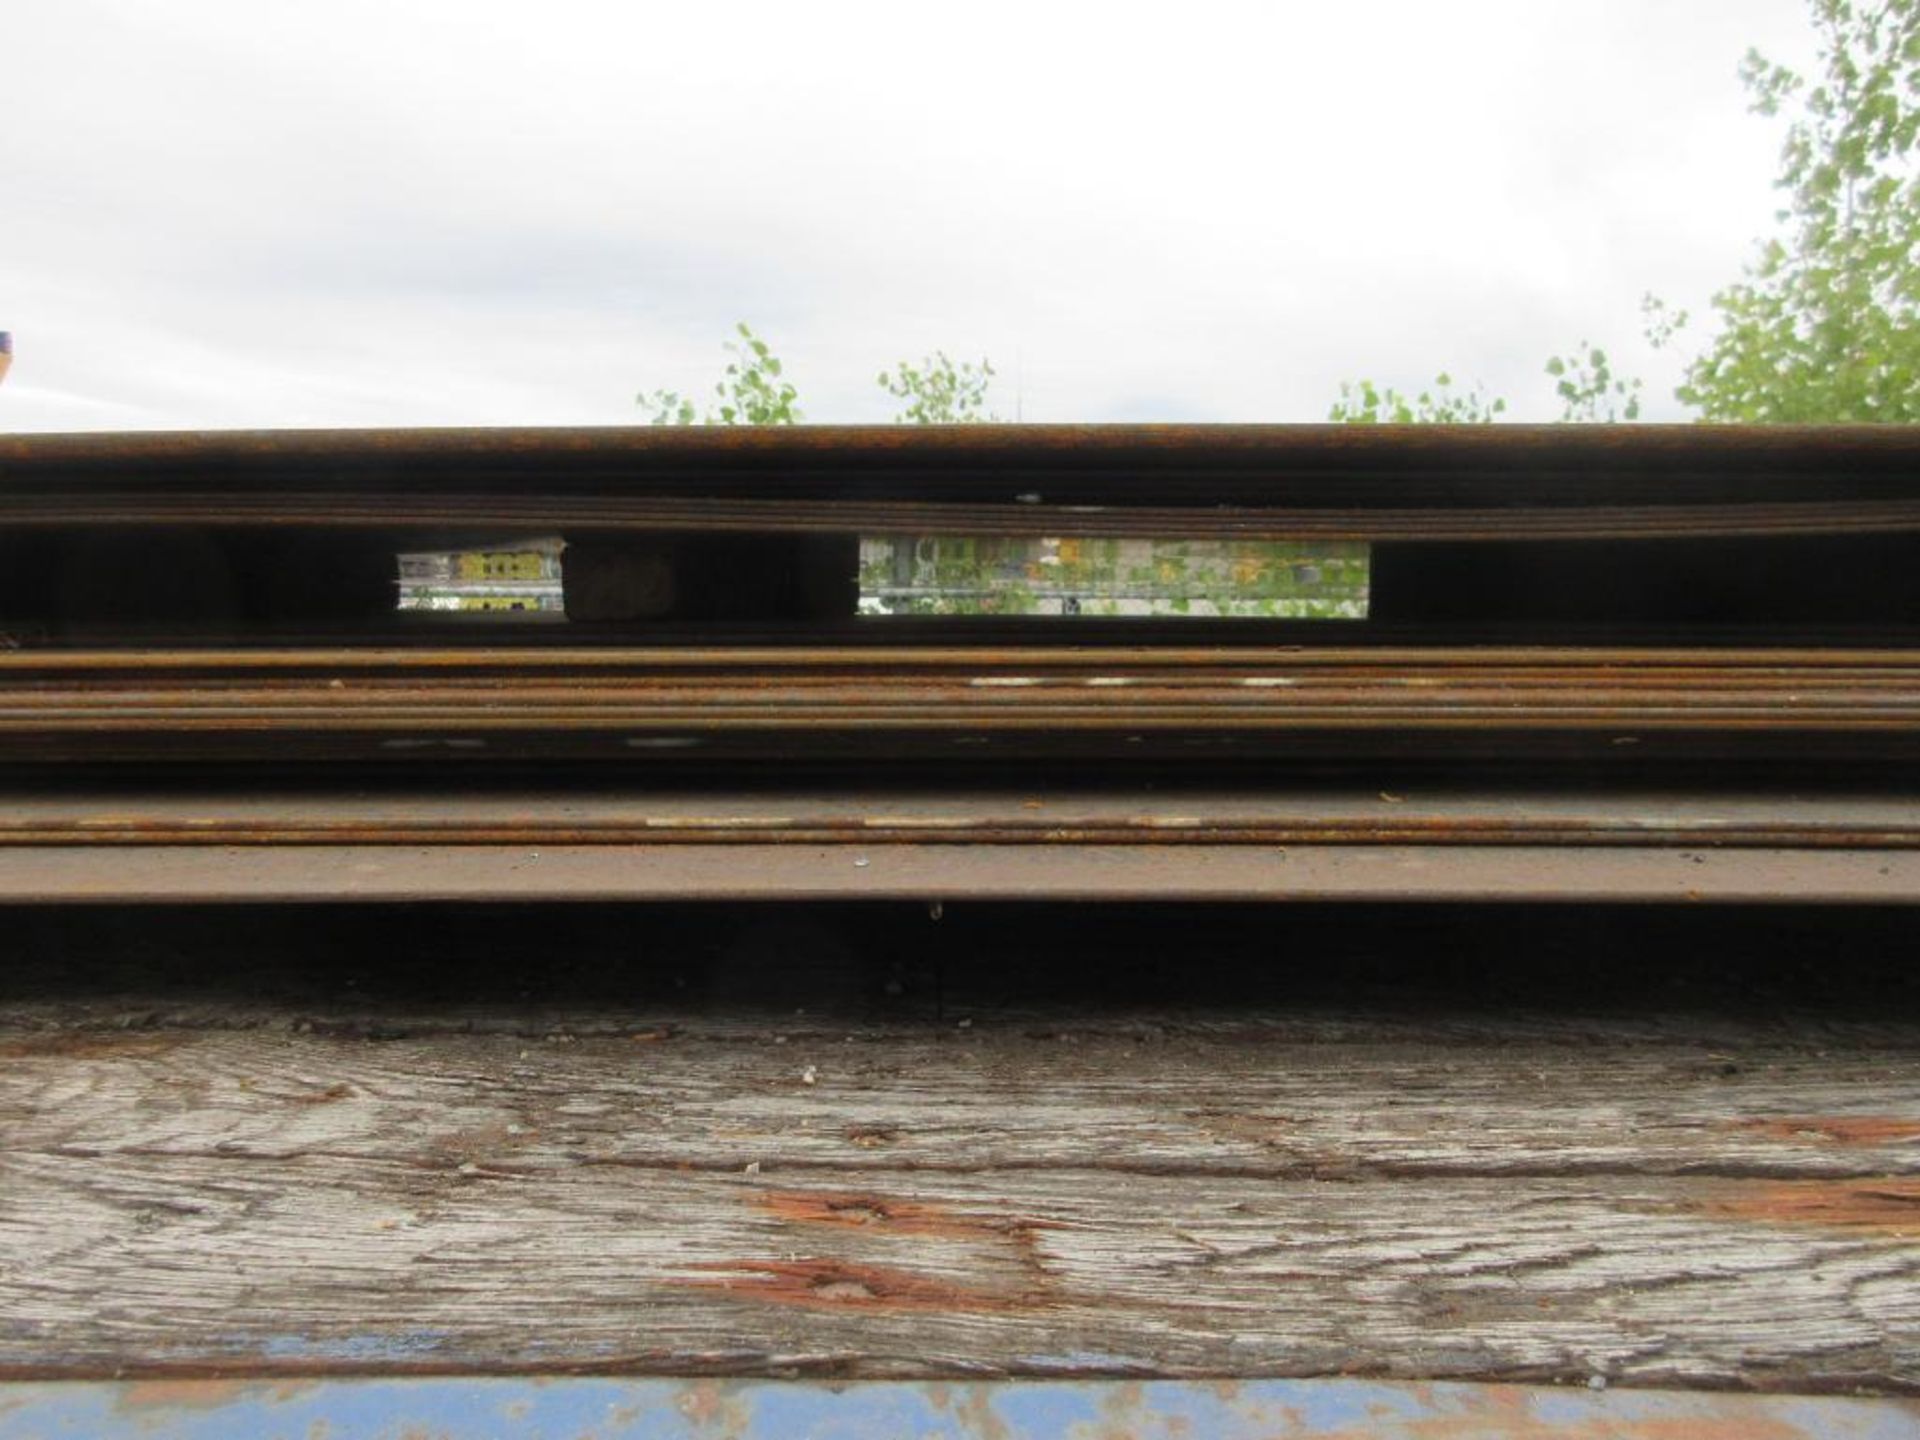 LOT OF 27 SHEETS OF PLATE STEEL ON TRAILER (NO TRAILER), TOTAL WEIGHT 293,559 LBS, SIZES PER PHOTO ( - Image 9 of 14